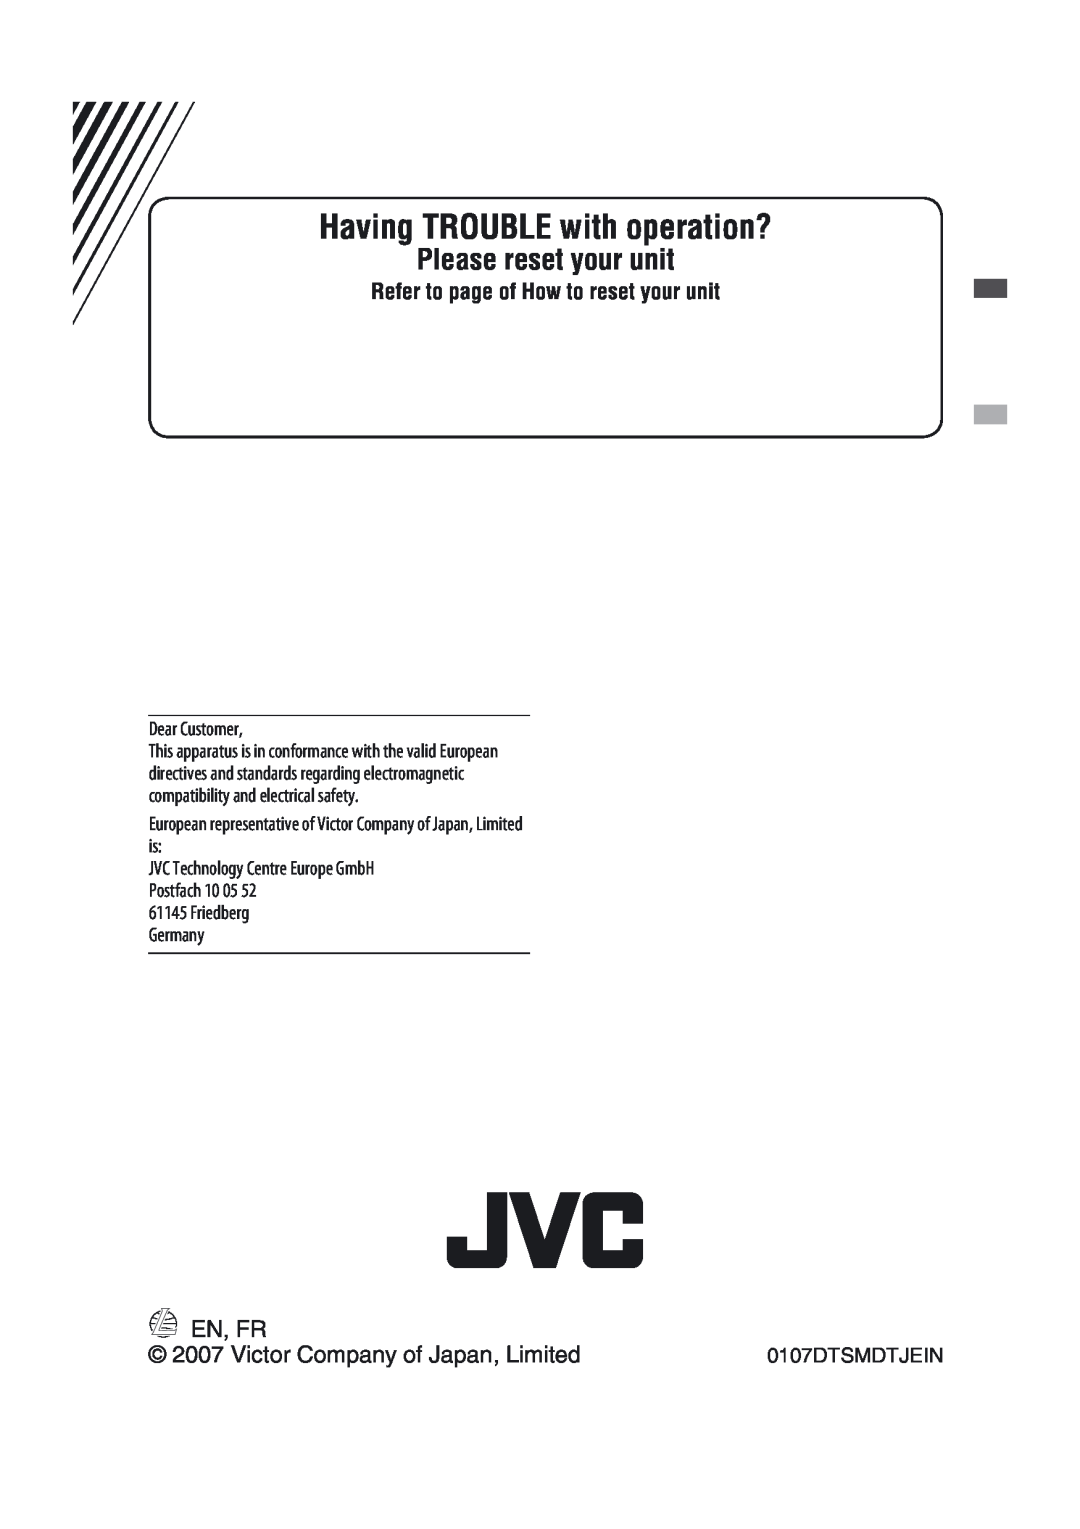 JVC KD-G731 manual En, Fr, Victor Company of Japan, Limited, Having TROUBLE with operation?, Please reset your unit 